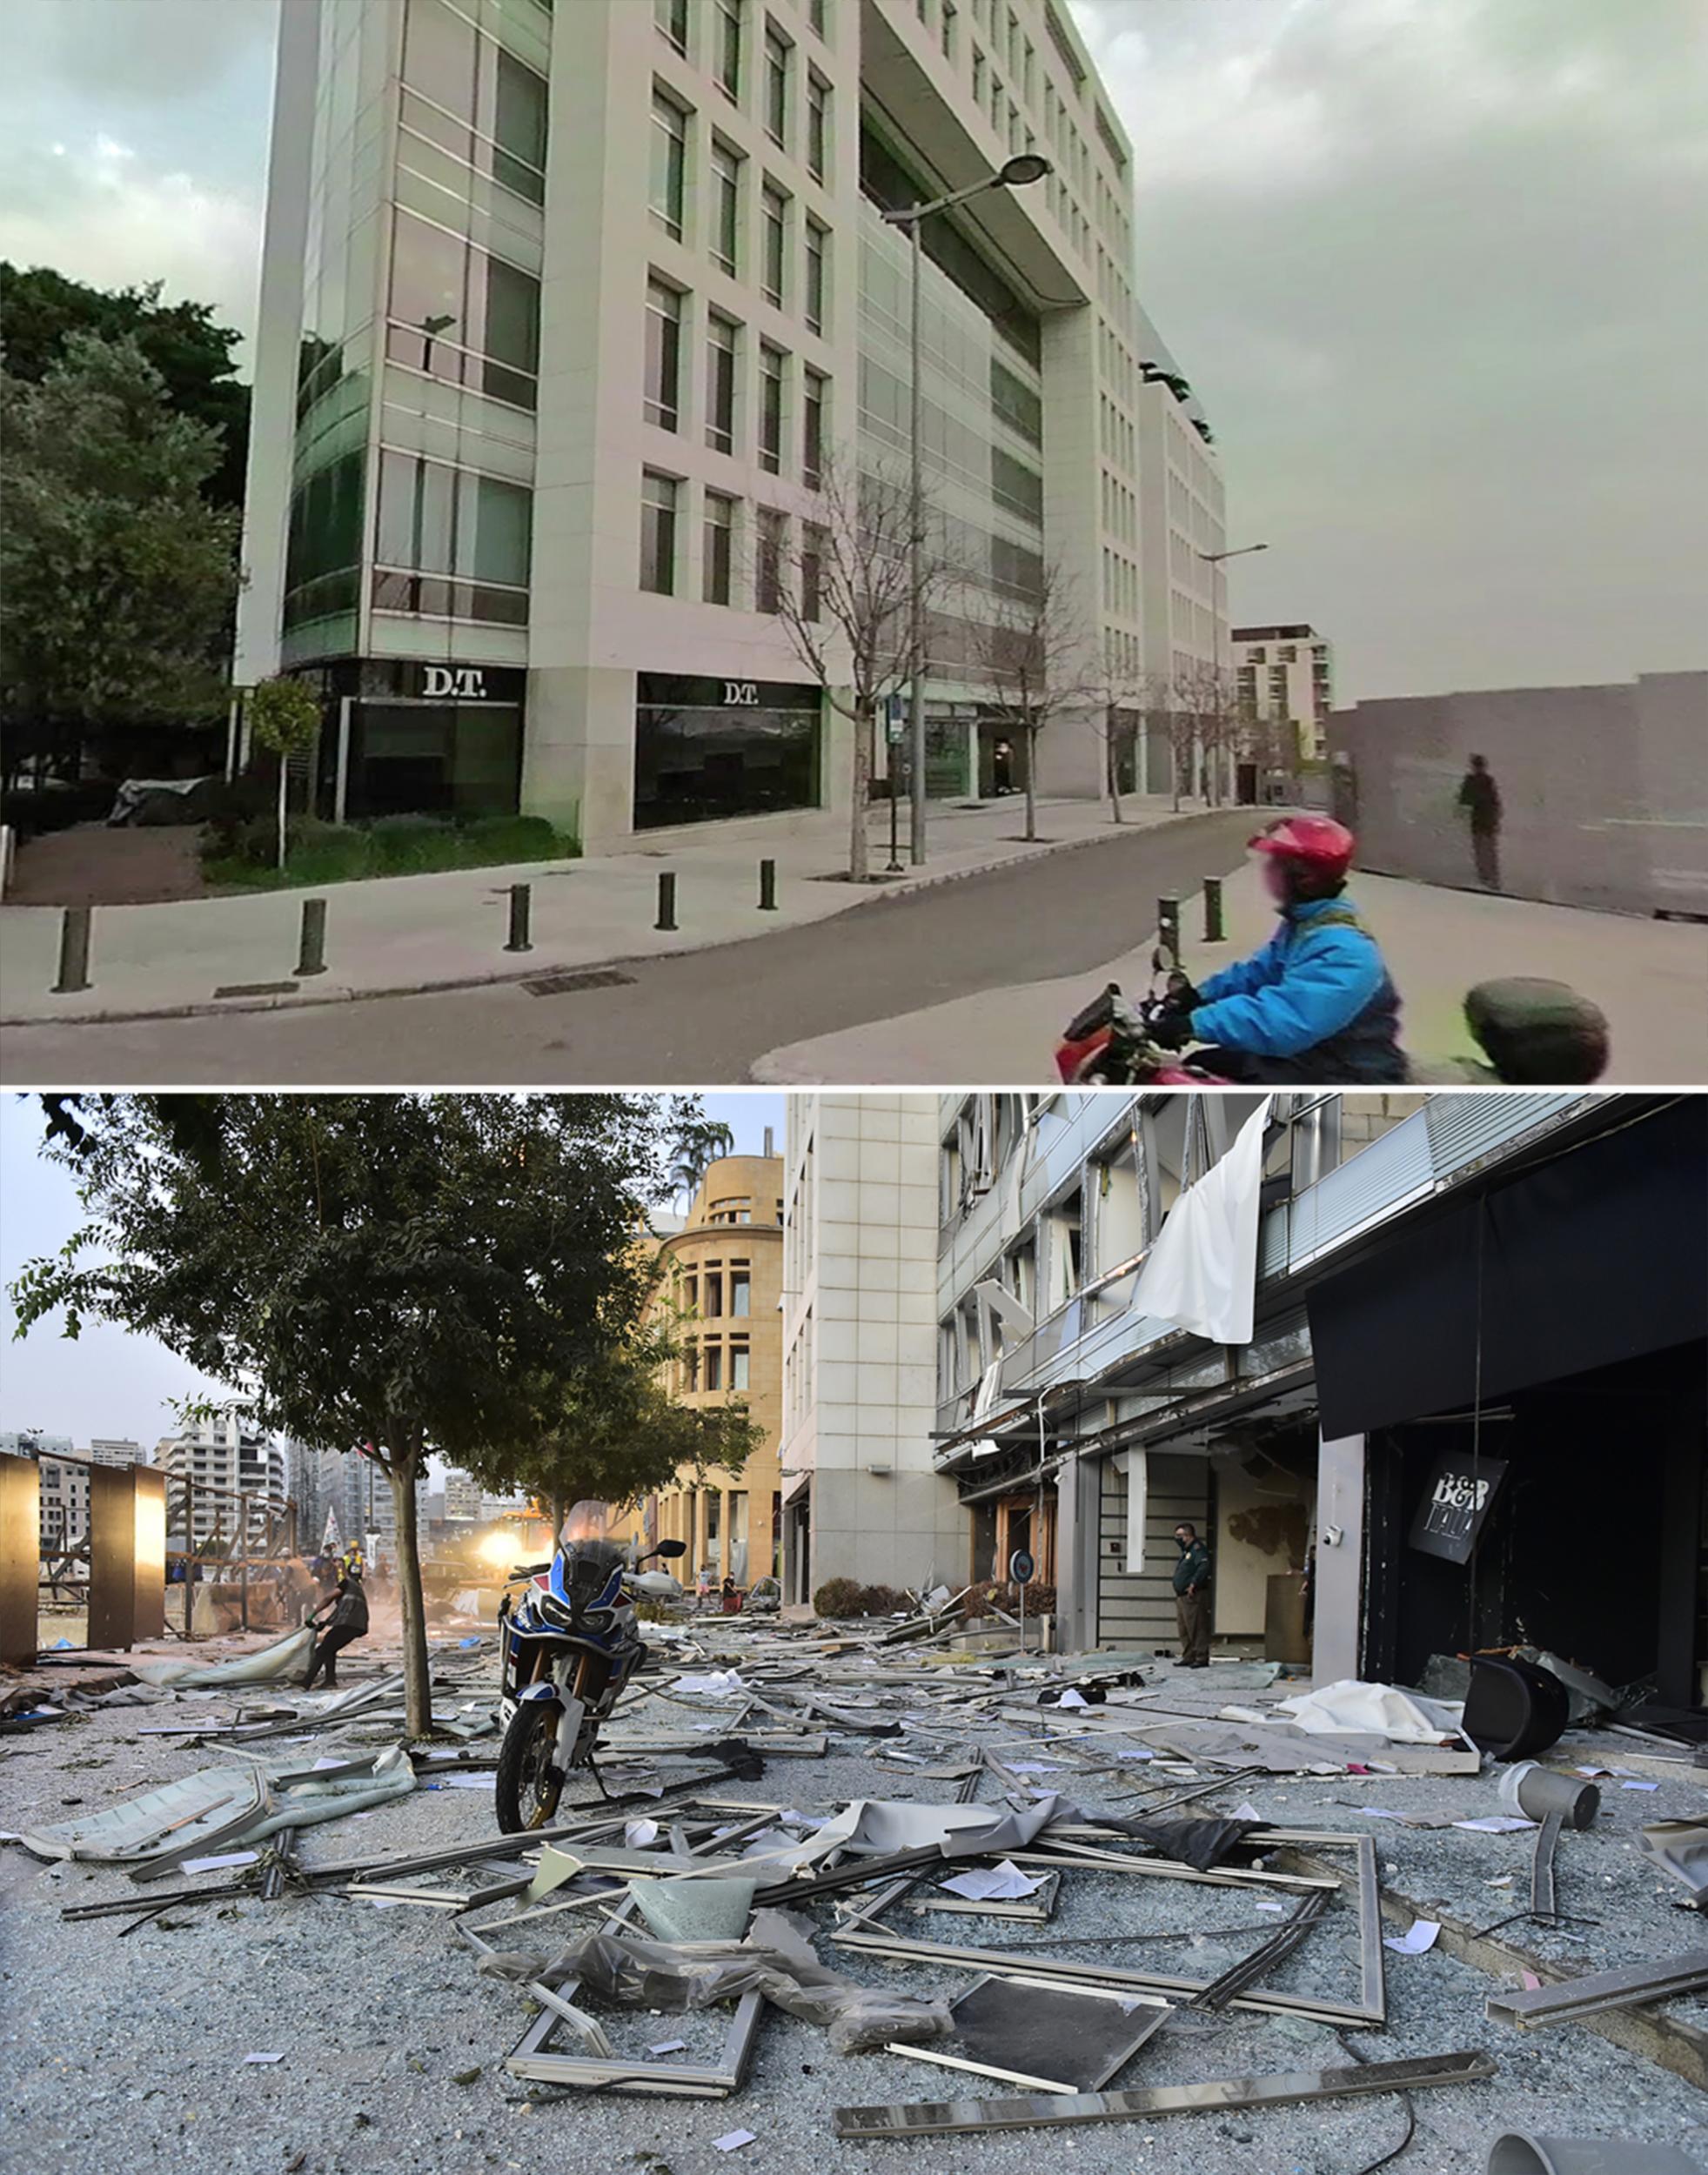 Before and after pictures of the warehouse where a fire led to the explosives blast at the port of Beirut